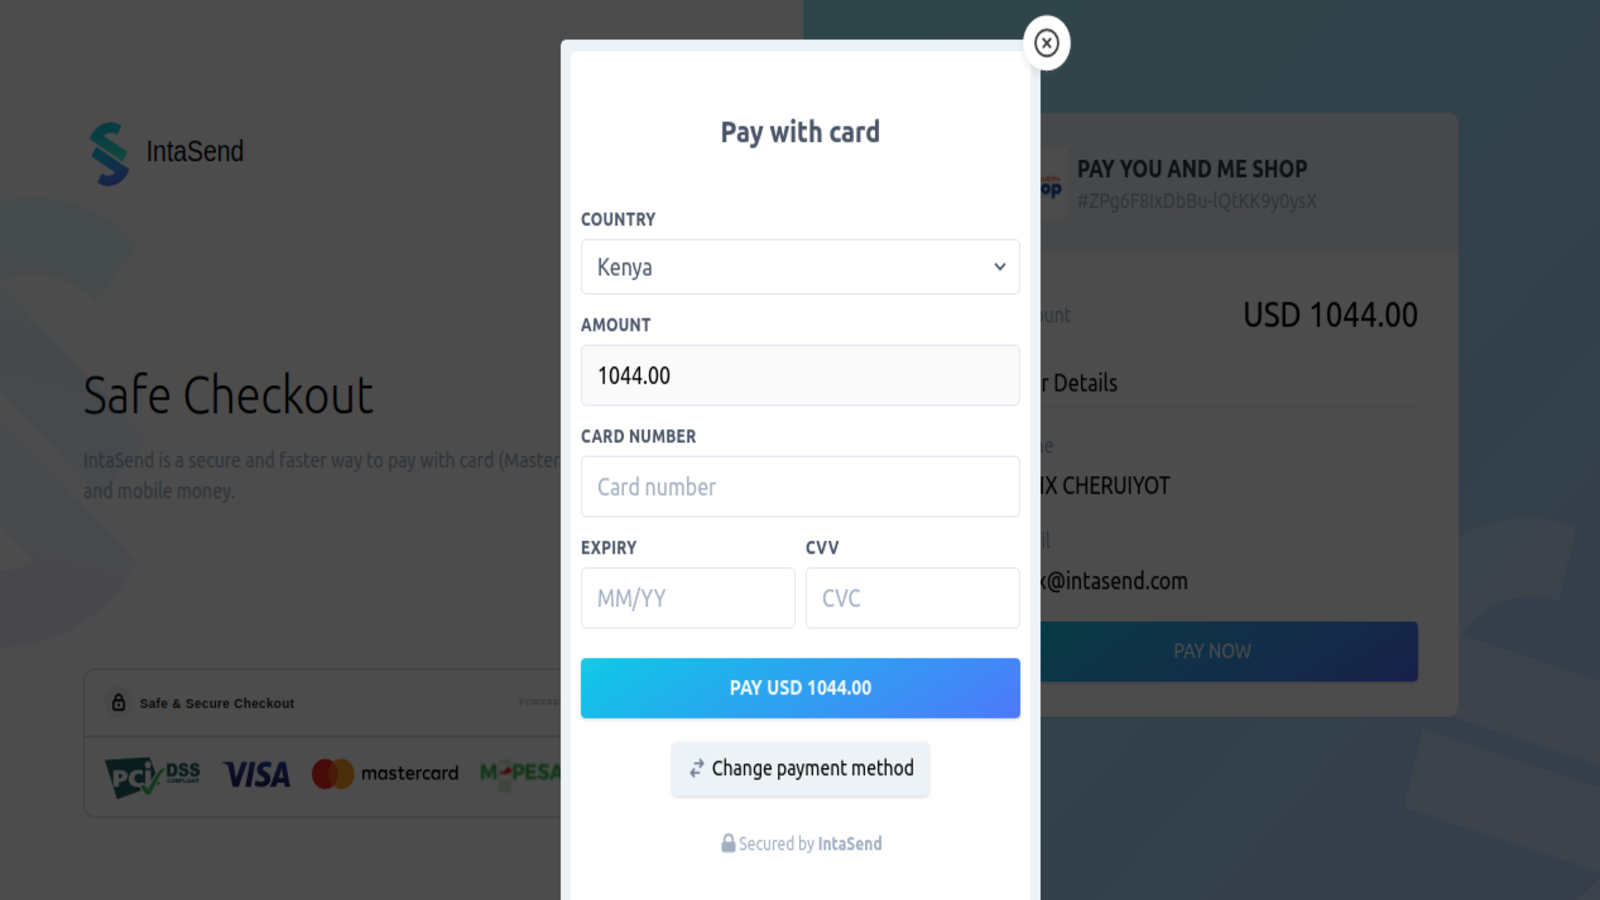 Pay with card